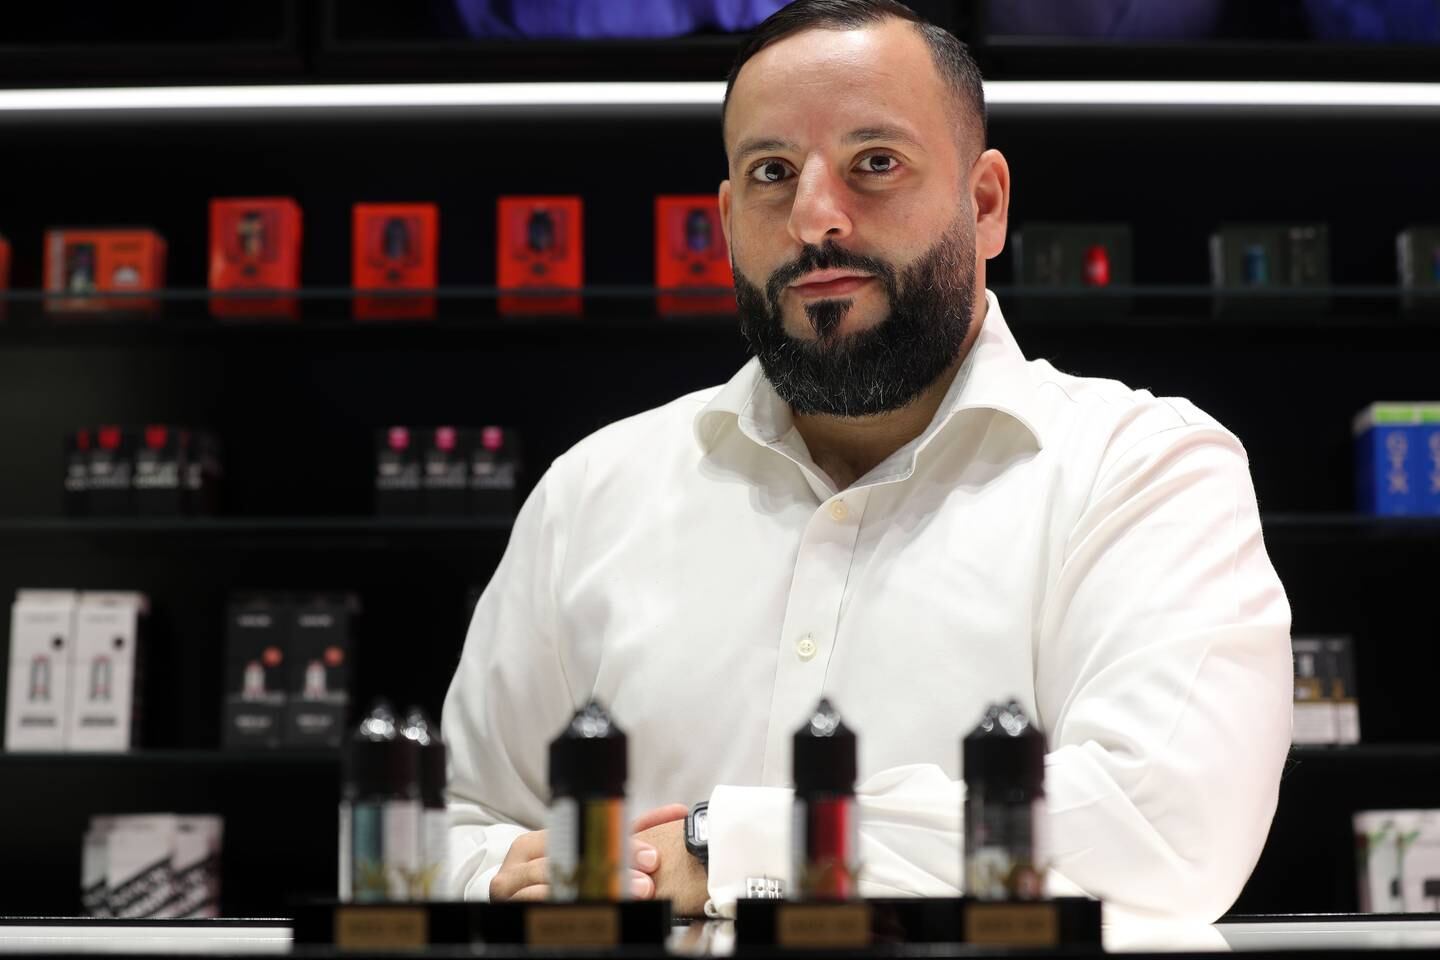 My Vapery's Atif Amin. Business owners warn against rise of counterfeit vaping products, why it's an issue and what to look out for at Mall of the Emirates in Dubai.